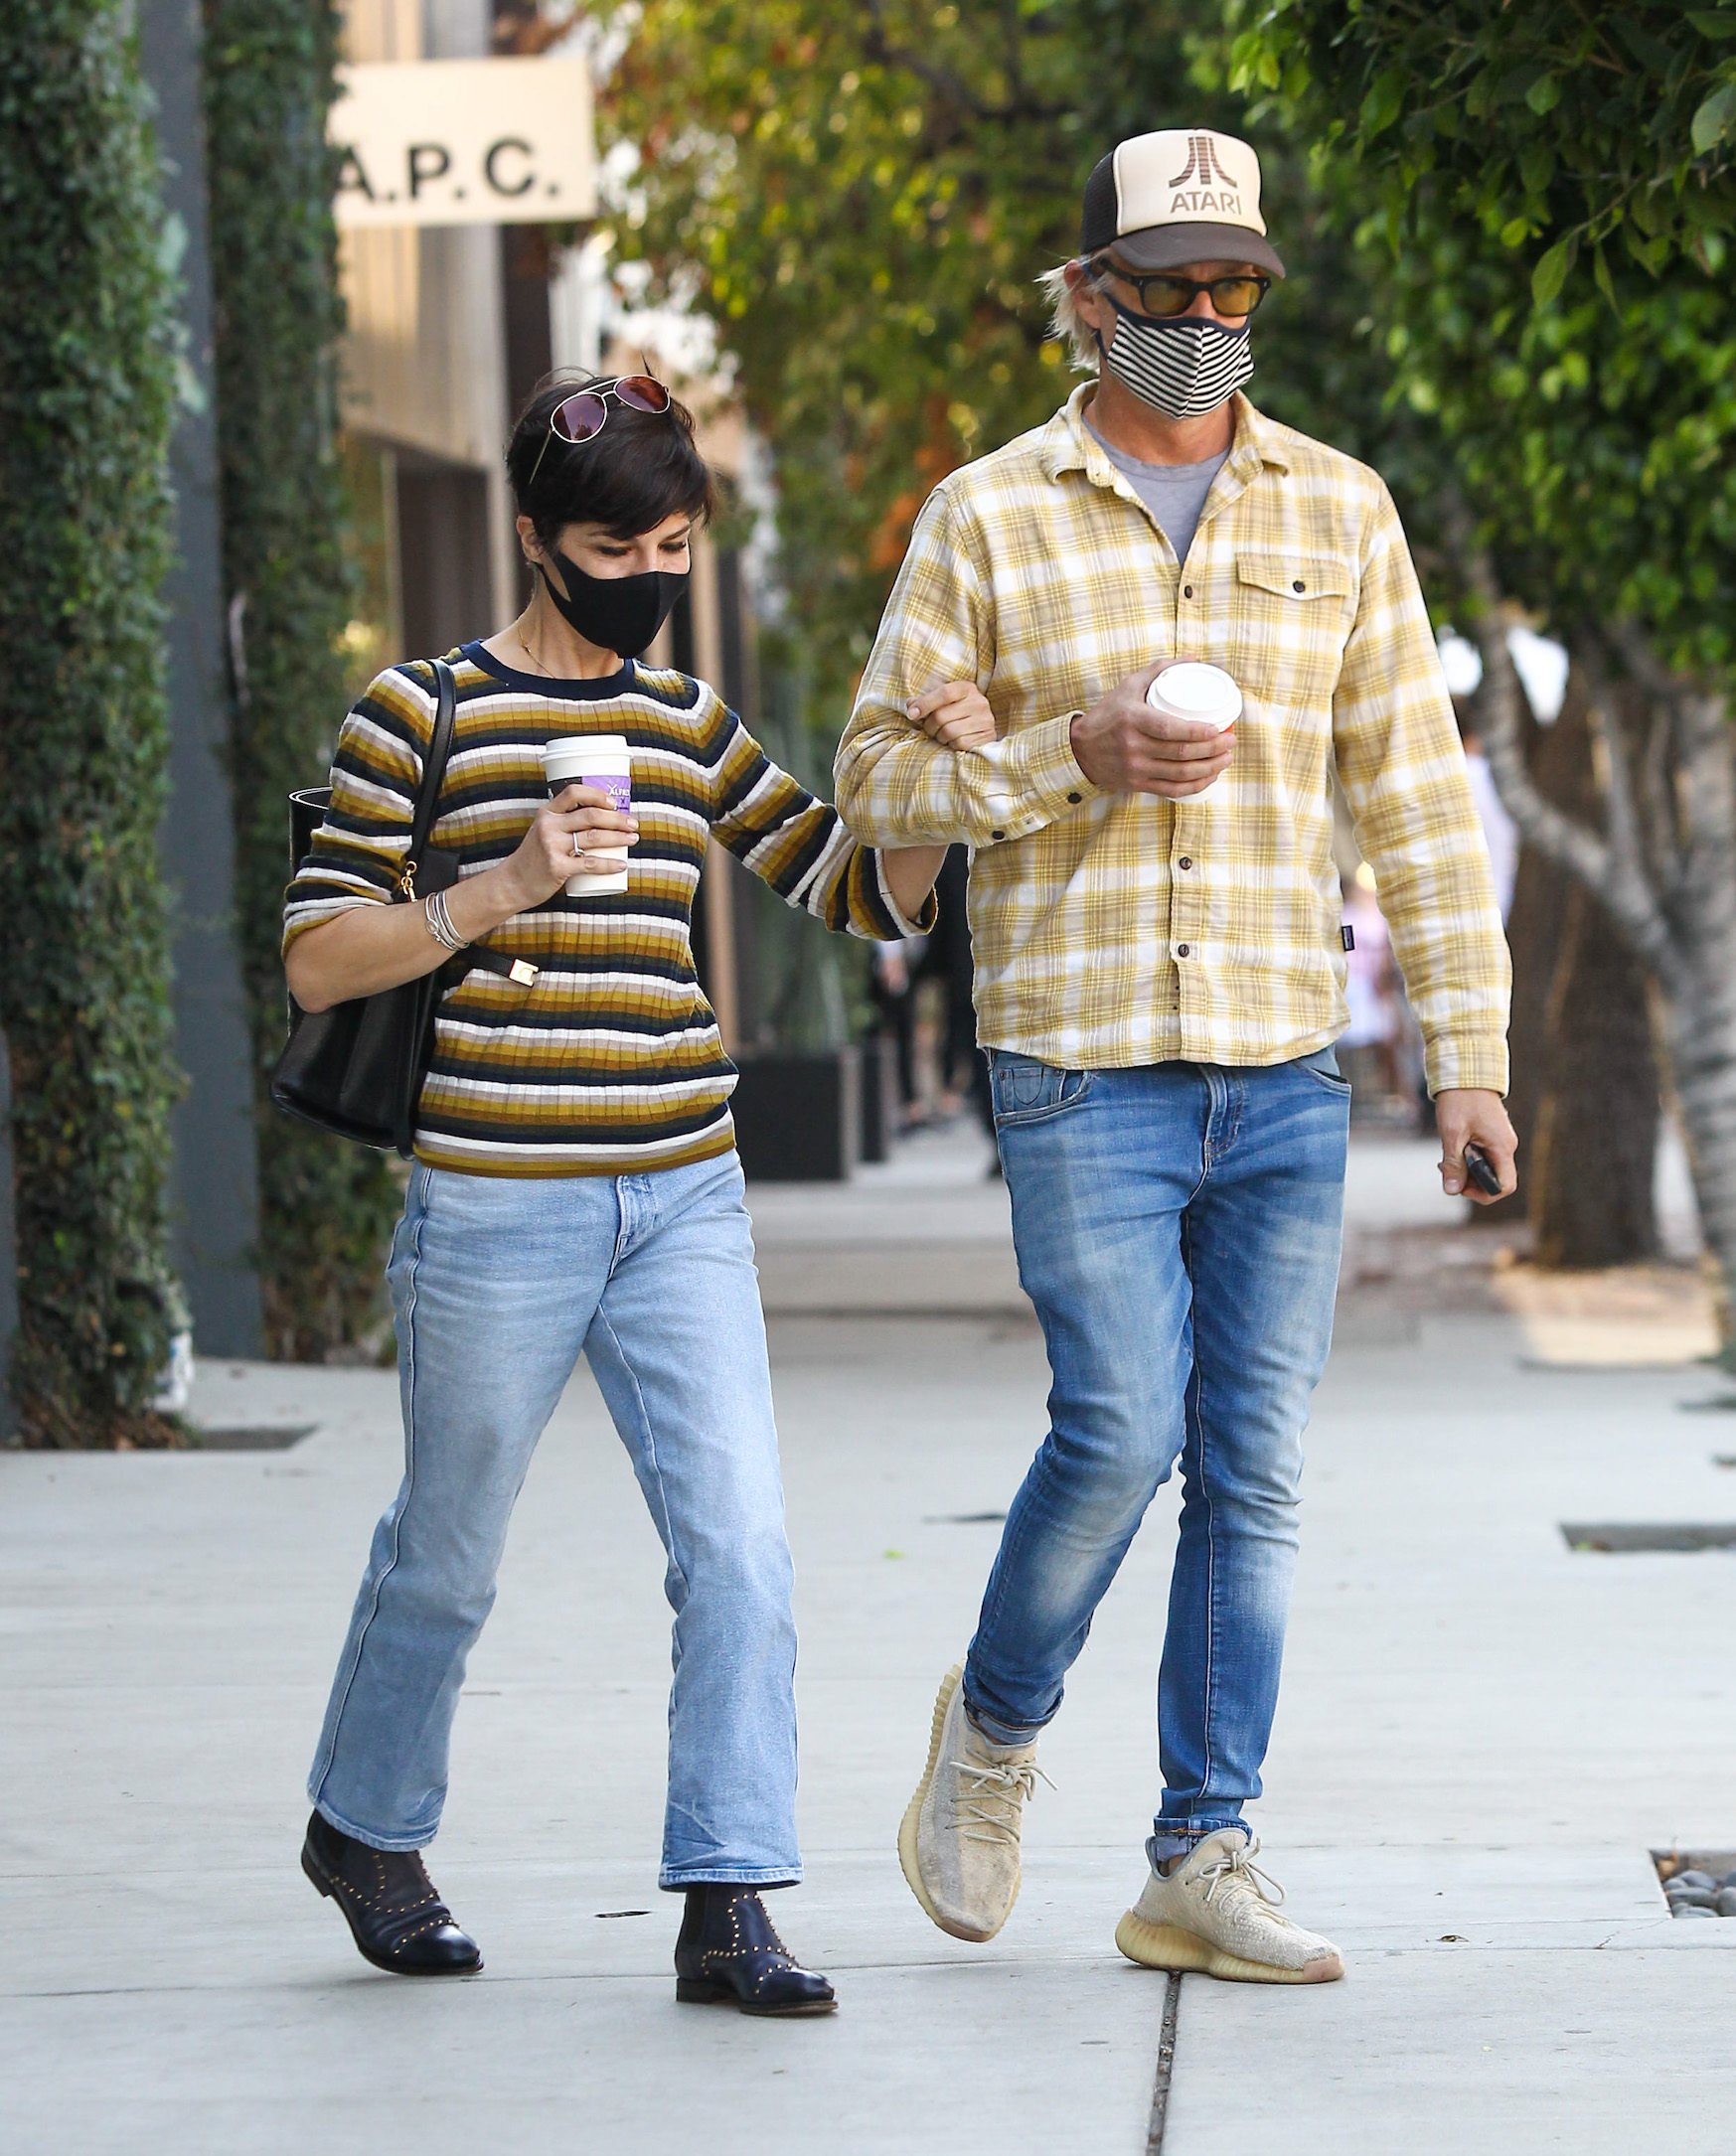 Selma Blair and Ron Carlson walking together outside with coffee in their hands